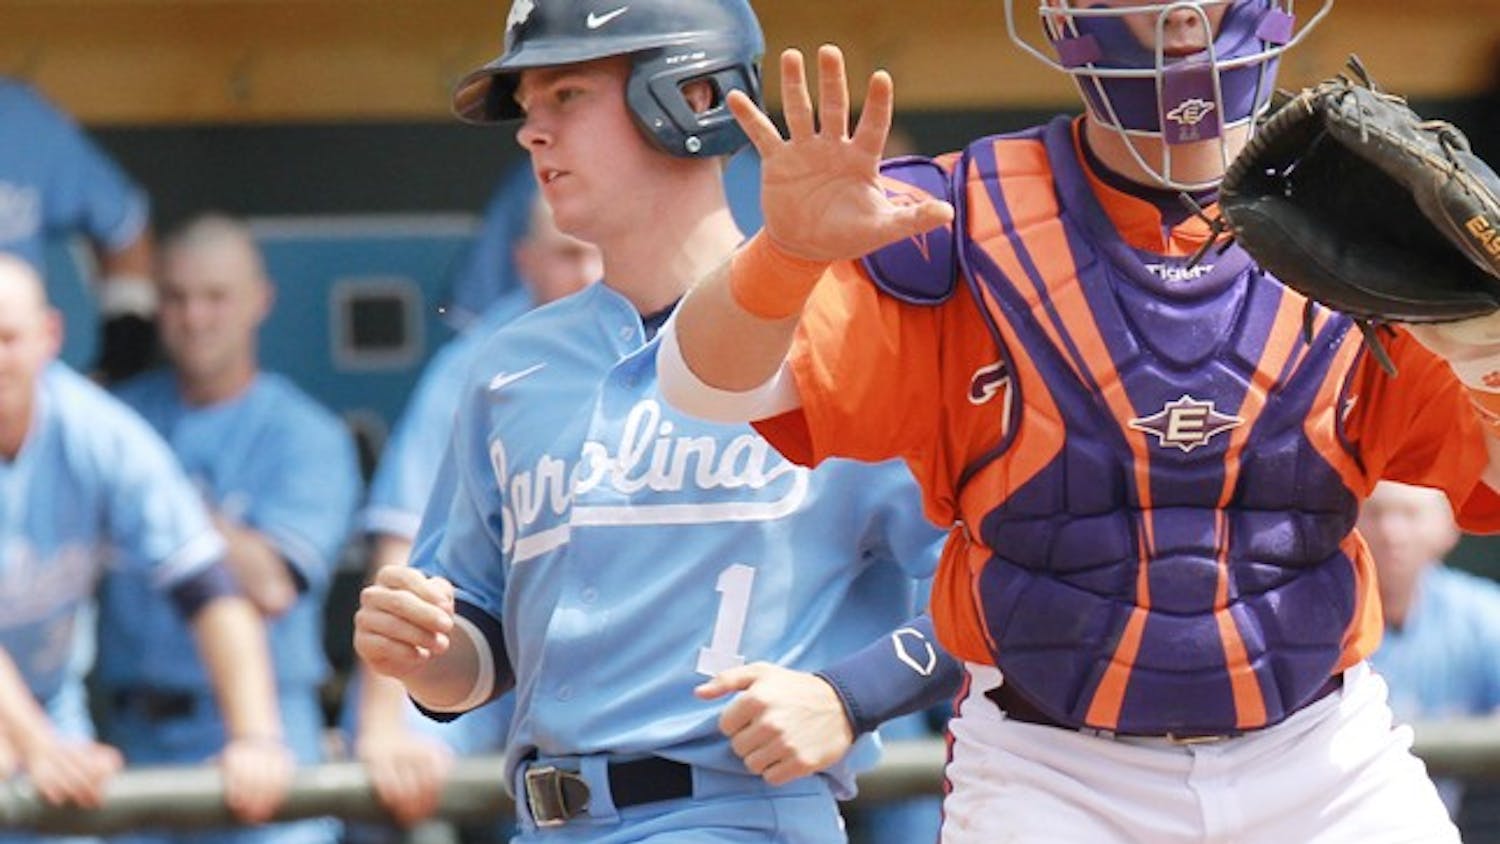 Second baseman Tommy Coyle scores uncontested in the bottom of the first inning. The Tar Heels completed a three-game sweep of the Clemson Tigers with a 5-4 victory on April 3.